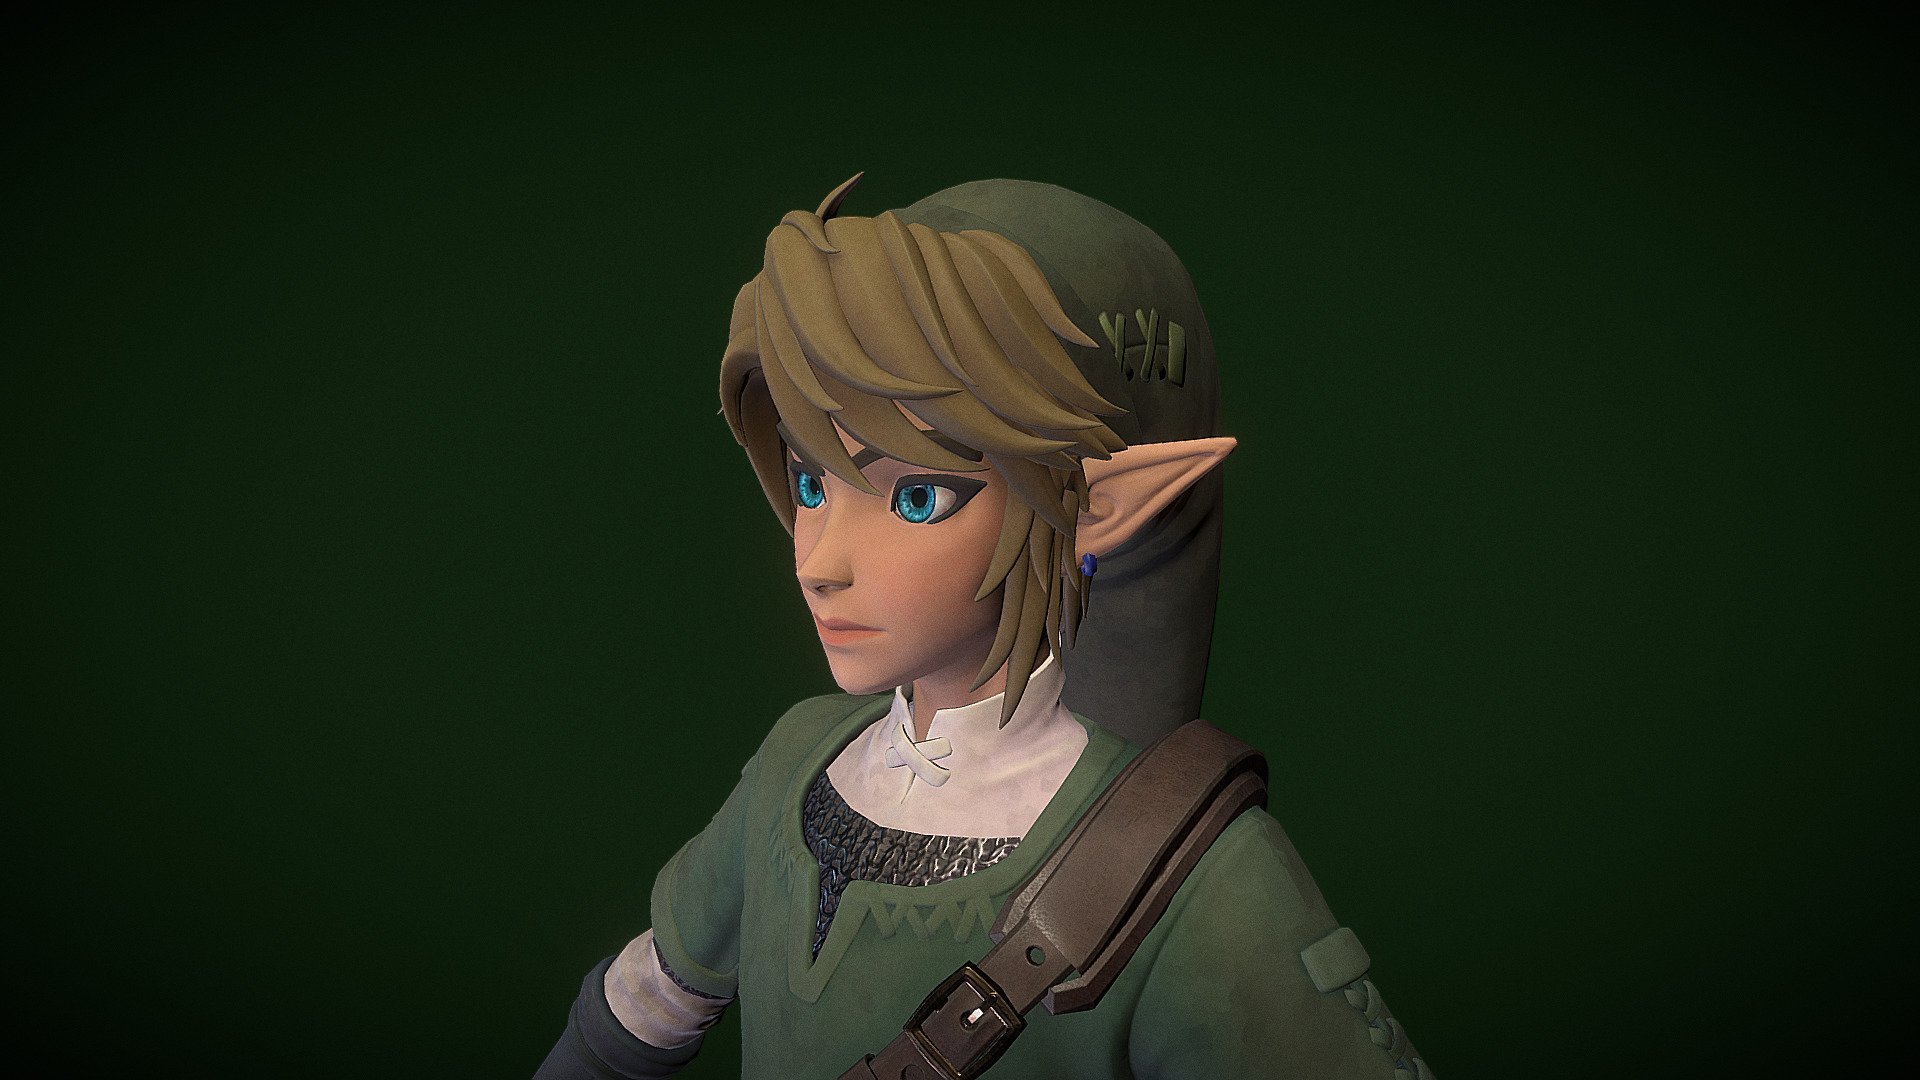 A Stylized Fan art of Link from Twilight Princess.
Made on Zbrush , retopo on Maya and Texture in Substance Painter.
I'm a huge fan of Twilight Princess and it was the first zelda I've played 3d model